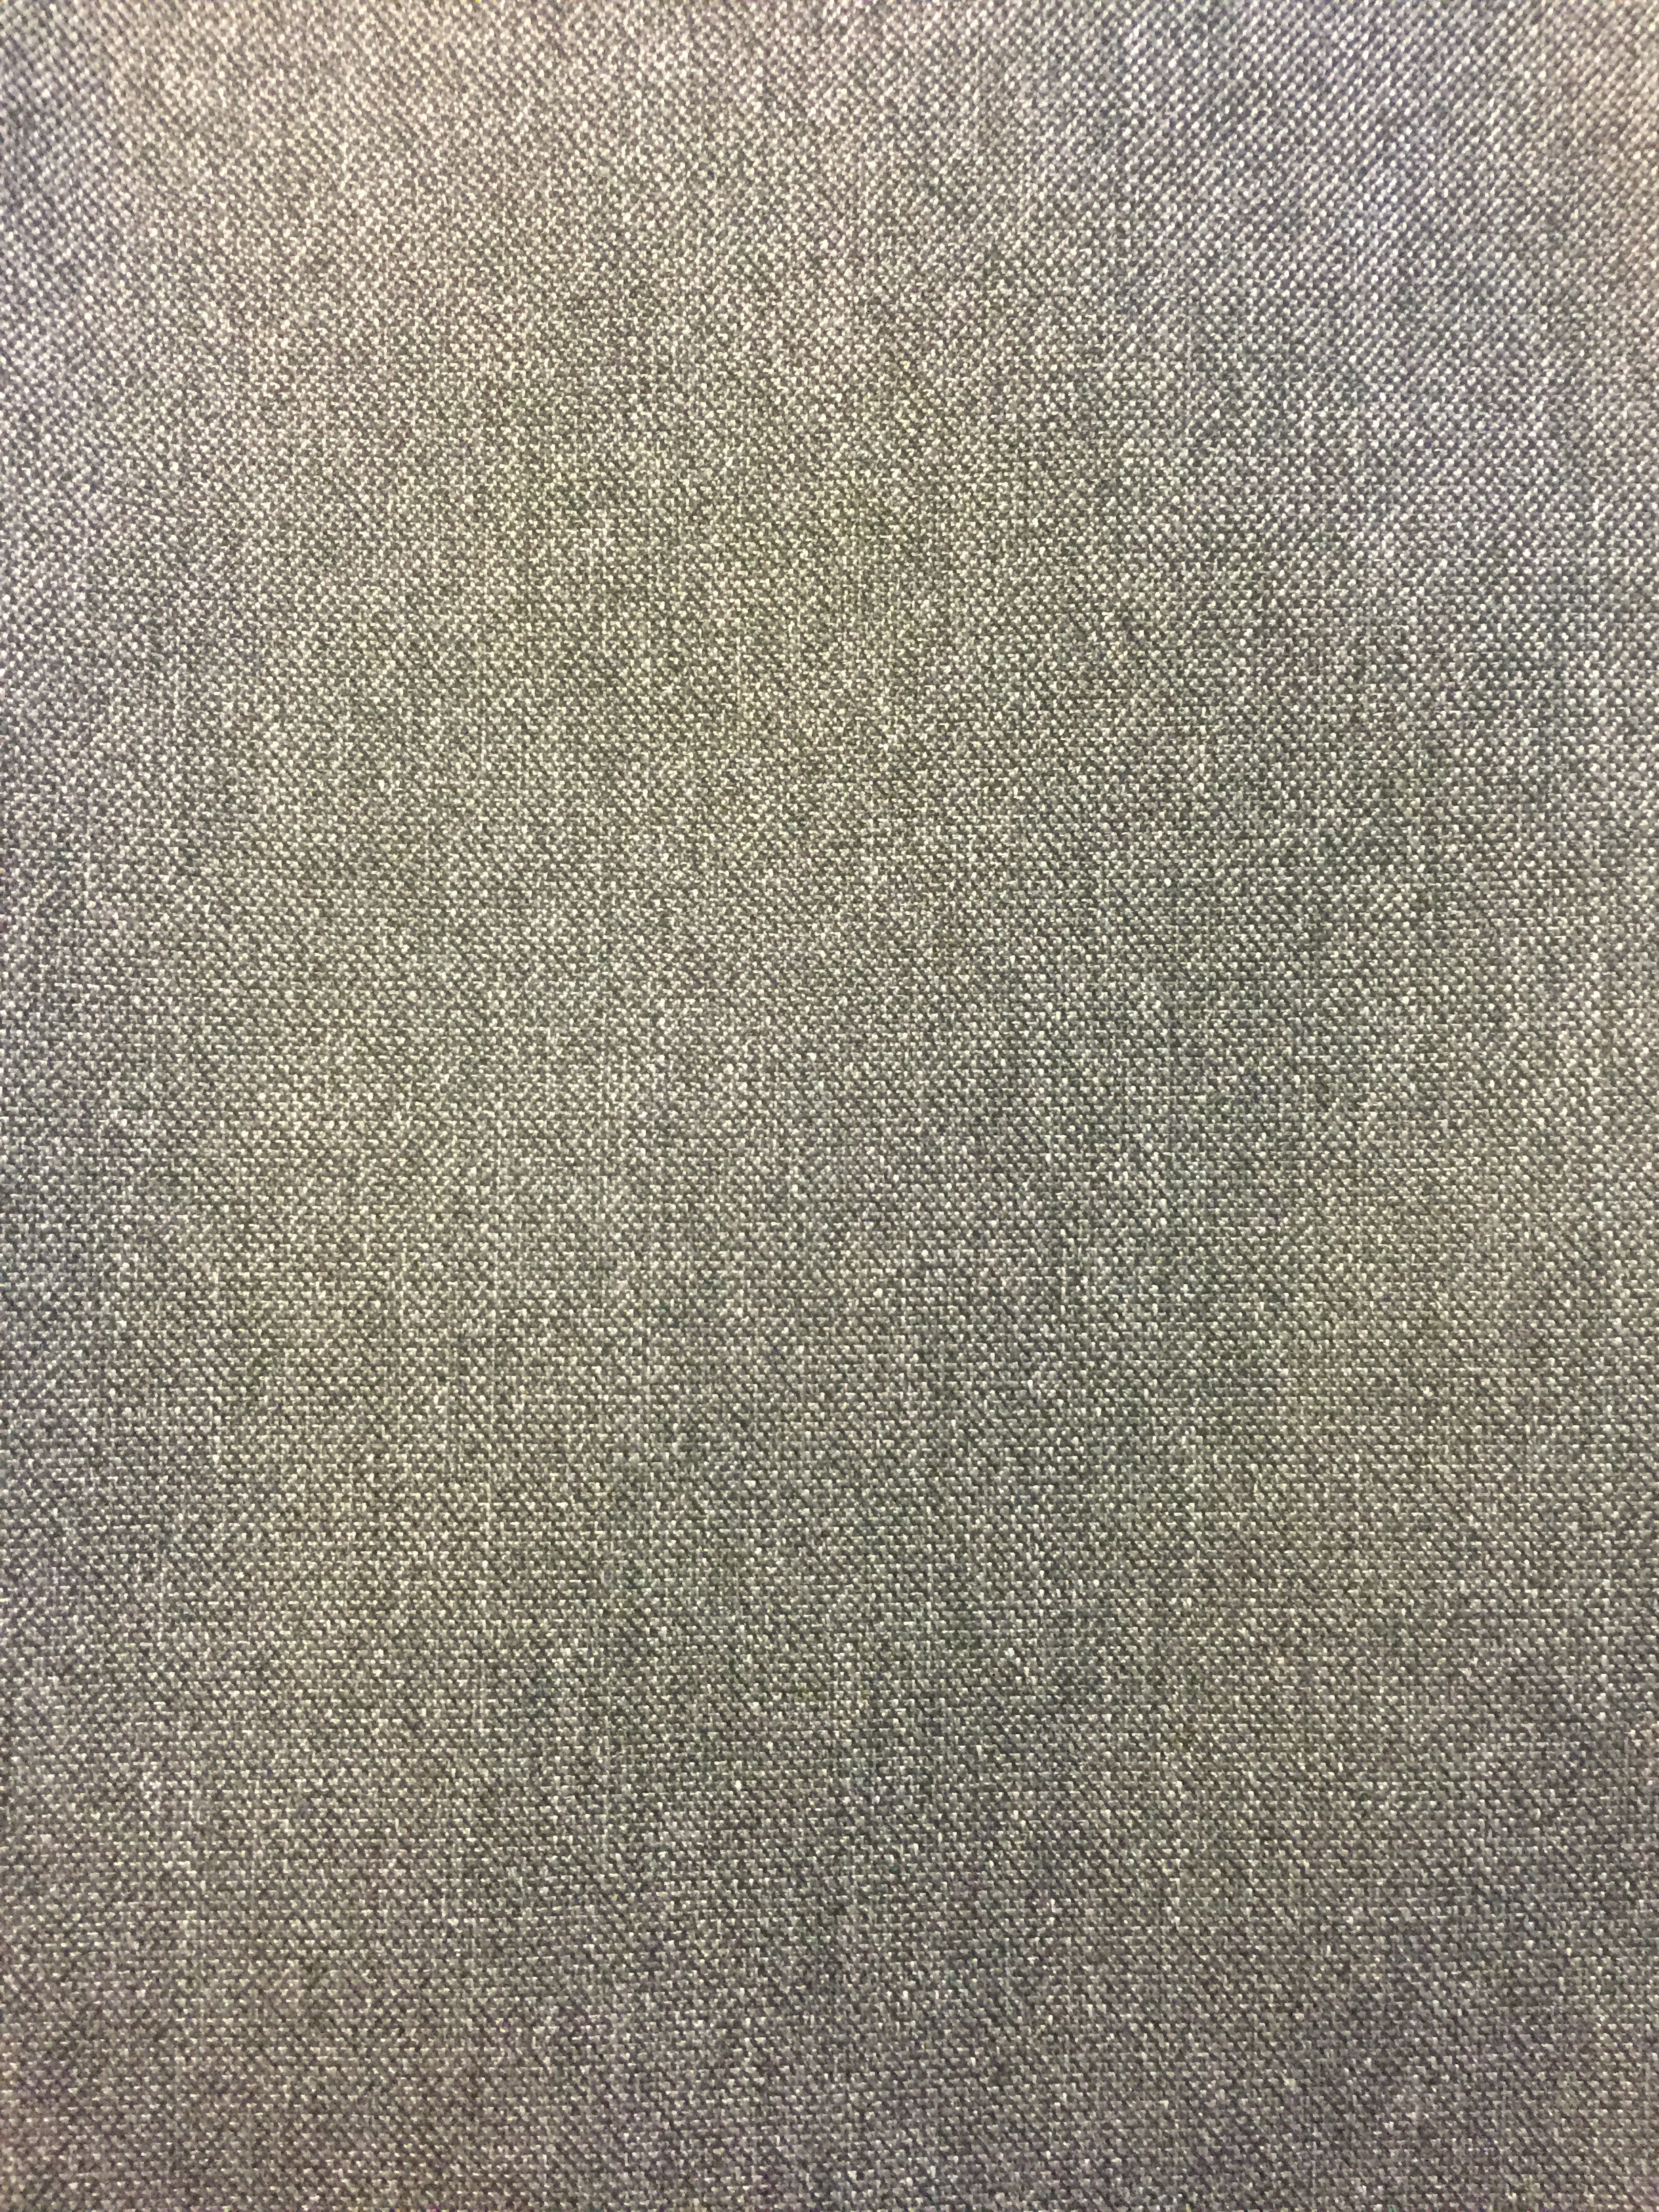 Gray Fabric Cloth Texture Stock Photo, Picture and Royalty Free